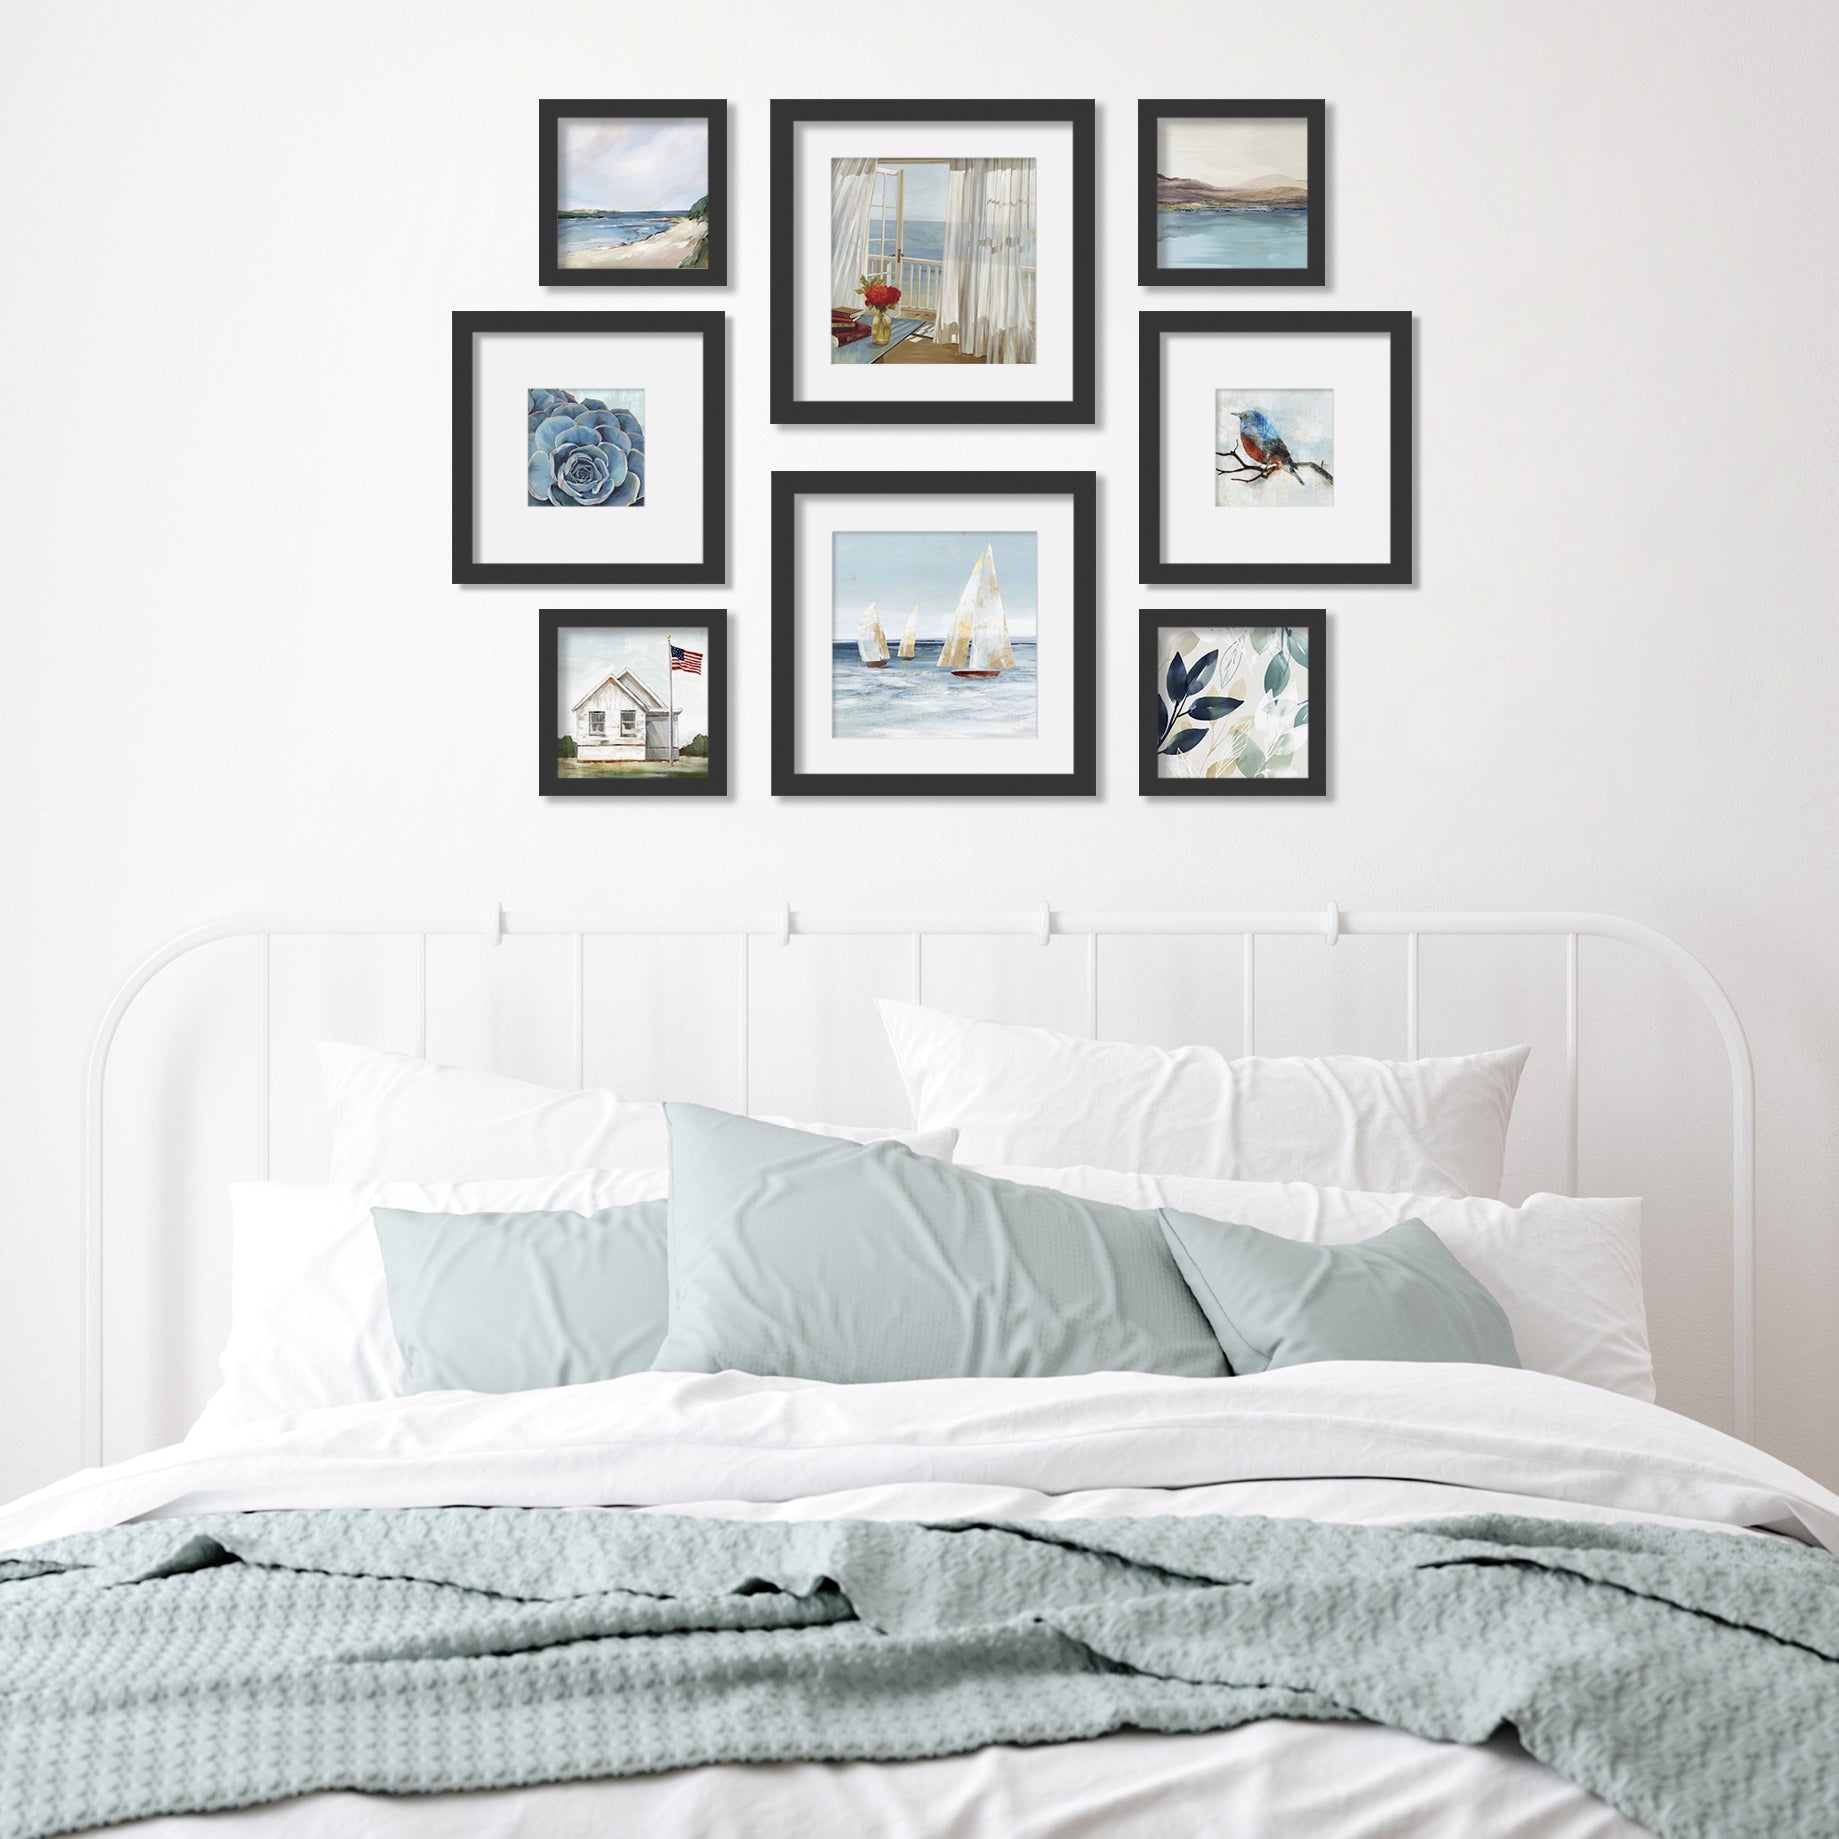 Out to Sea - 8 Piece Framed Gallery Wall Art Set - Americanflat